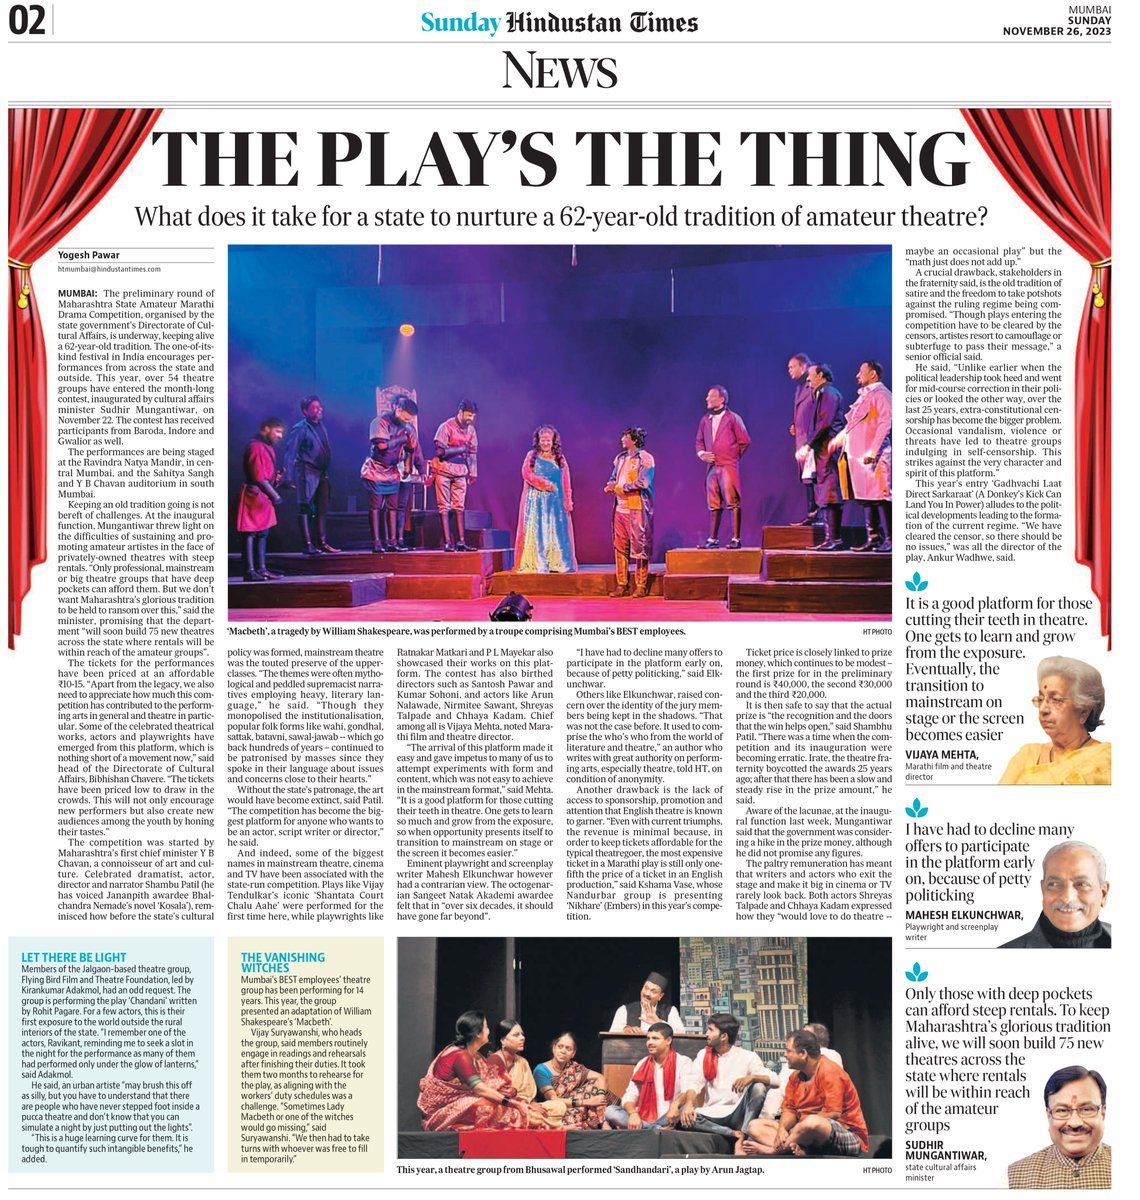 THE PLAY’S THE THING What does it take for a state to nurture a 62-year-old tradition of amateur theatre? @htTweets @powerofyogesh